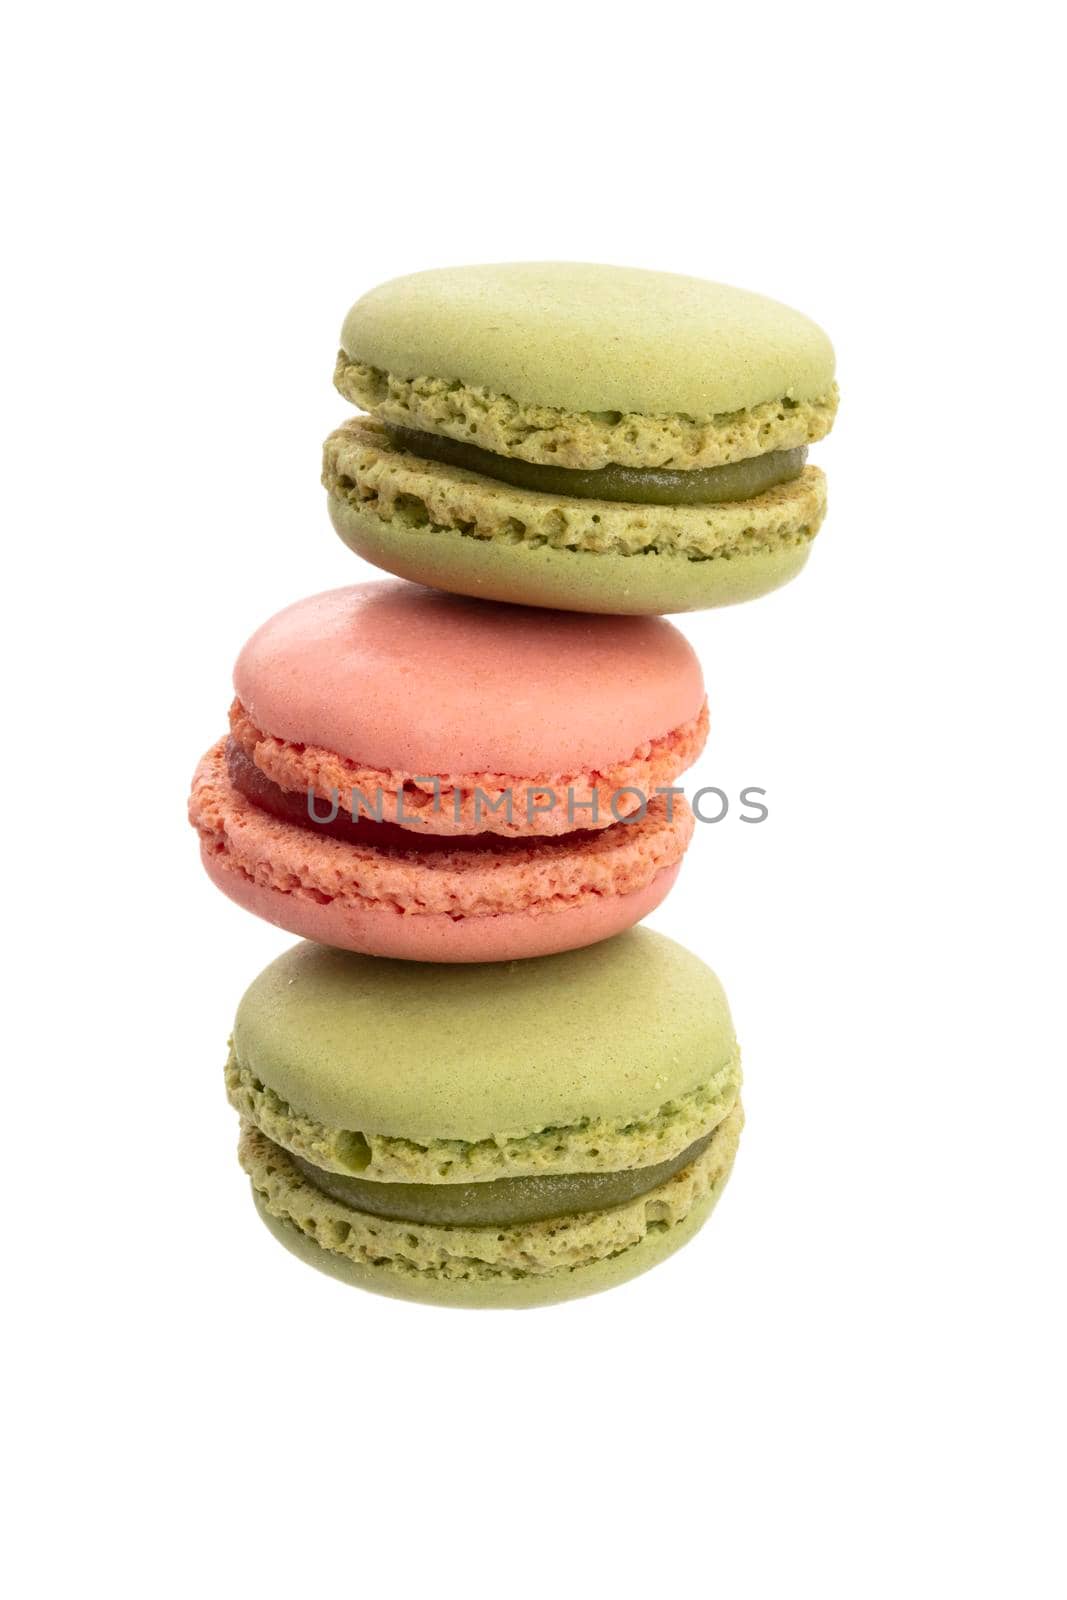 Macaroon isolated on a white background.